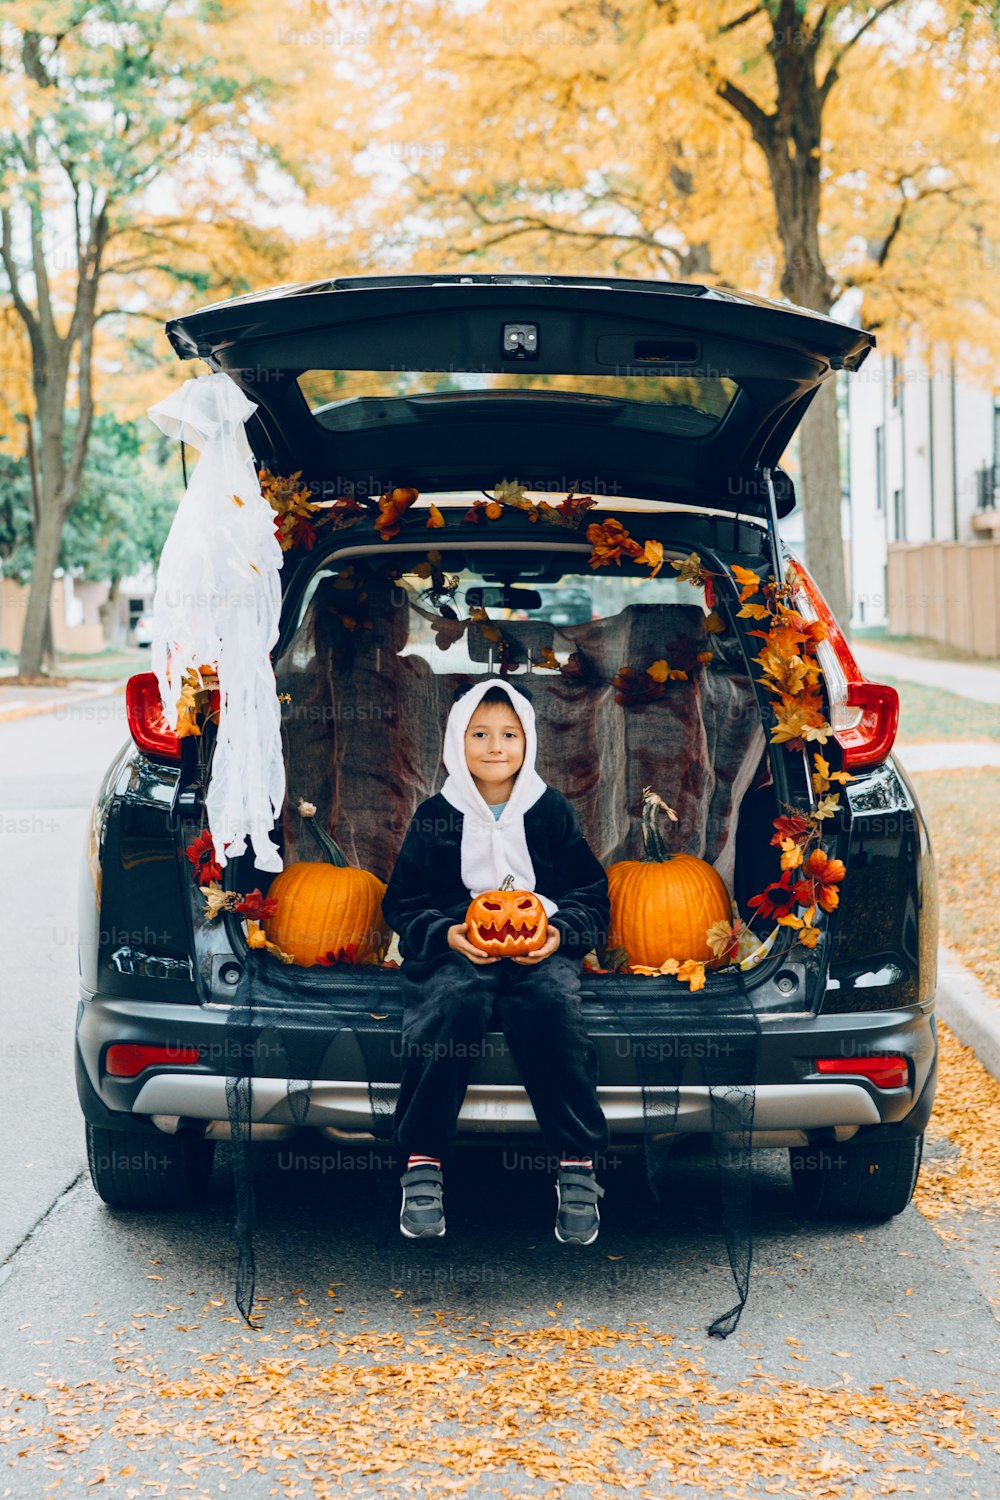 Trick or trunk. Child boy celebrating Halloween in trunk of car. Kid with red carved pumpkin celebrating traditional October holiday outdoor. Social distance and safe alternative celebration.